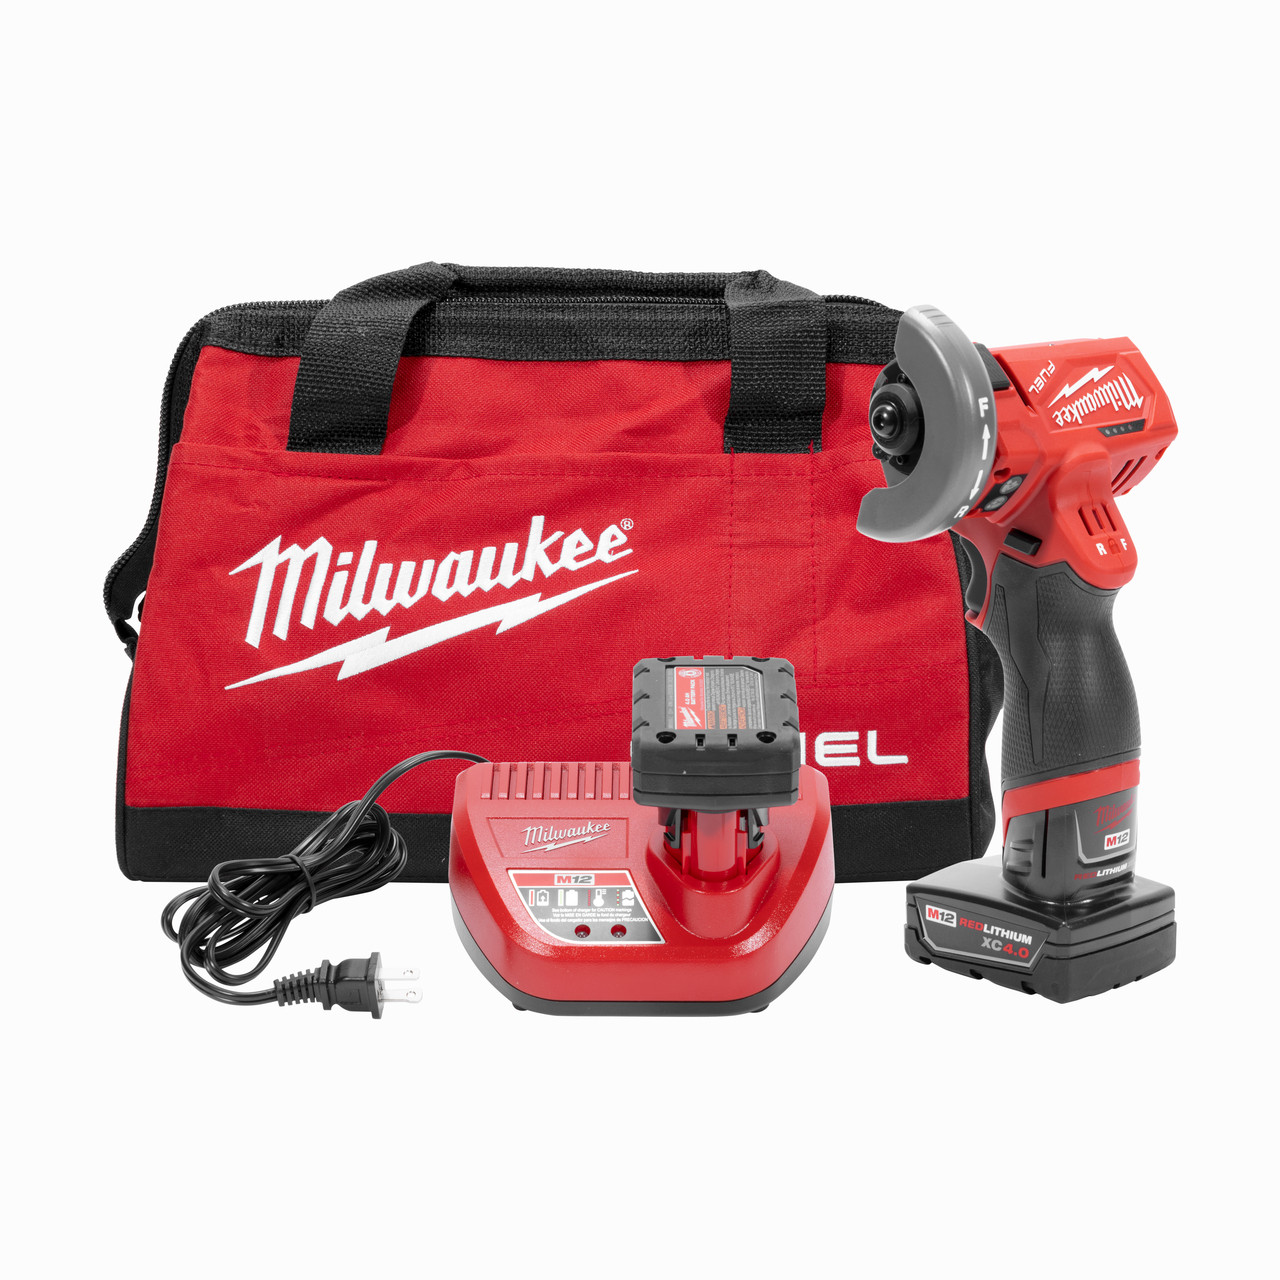 Milwaukee 2529-21XC M12 FUEL 12-Volt Lithium-Ion Cordless Compact Band Saw XC Kit with One 4.0 Ah Battery, Charger and Tool Bag - 5